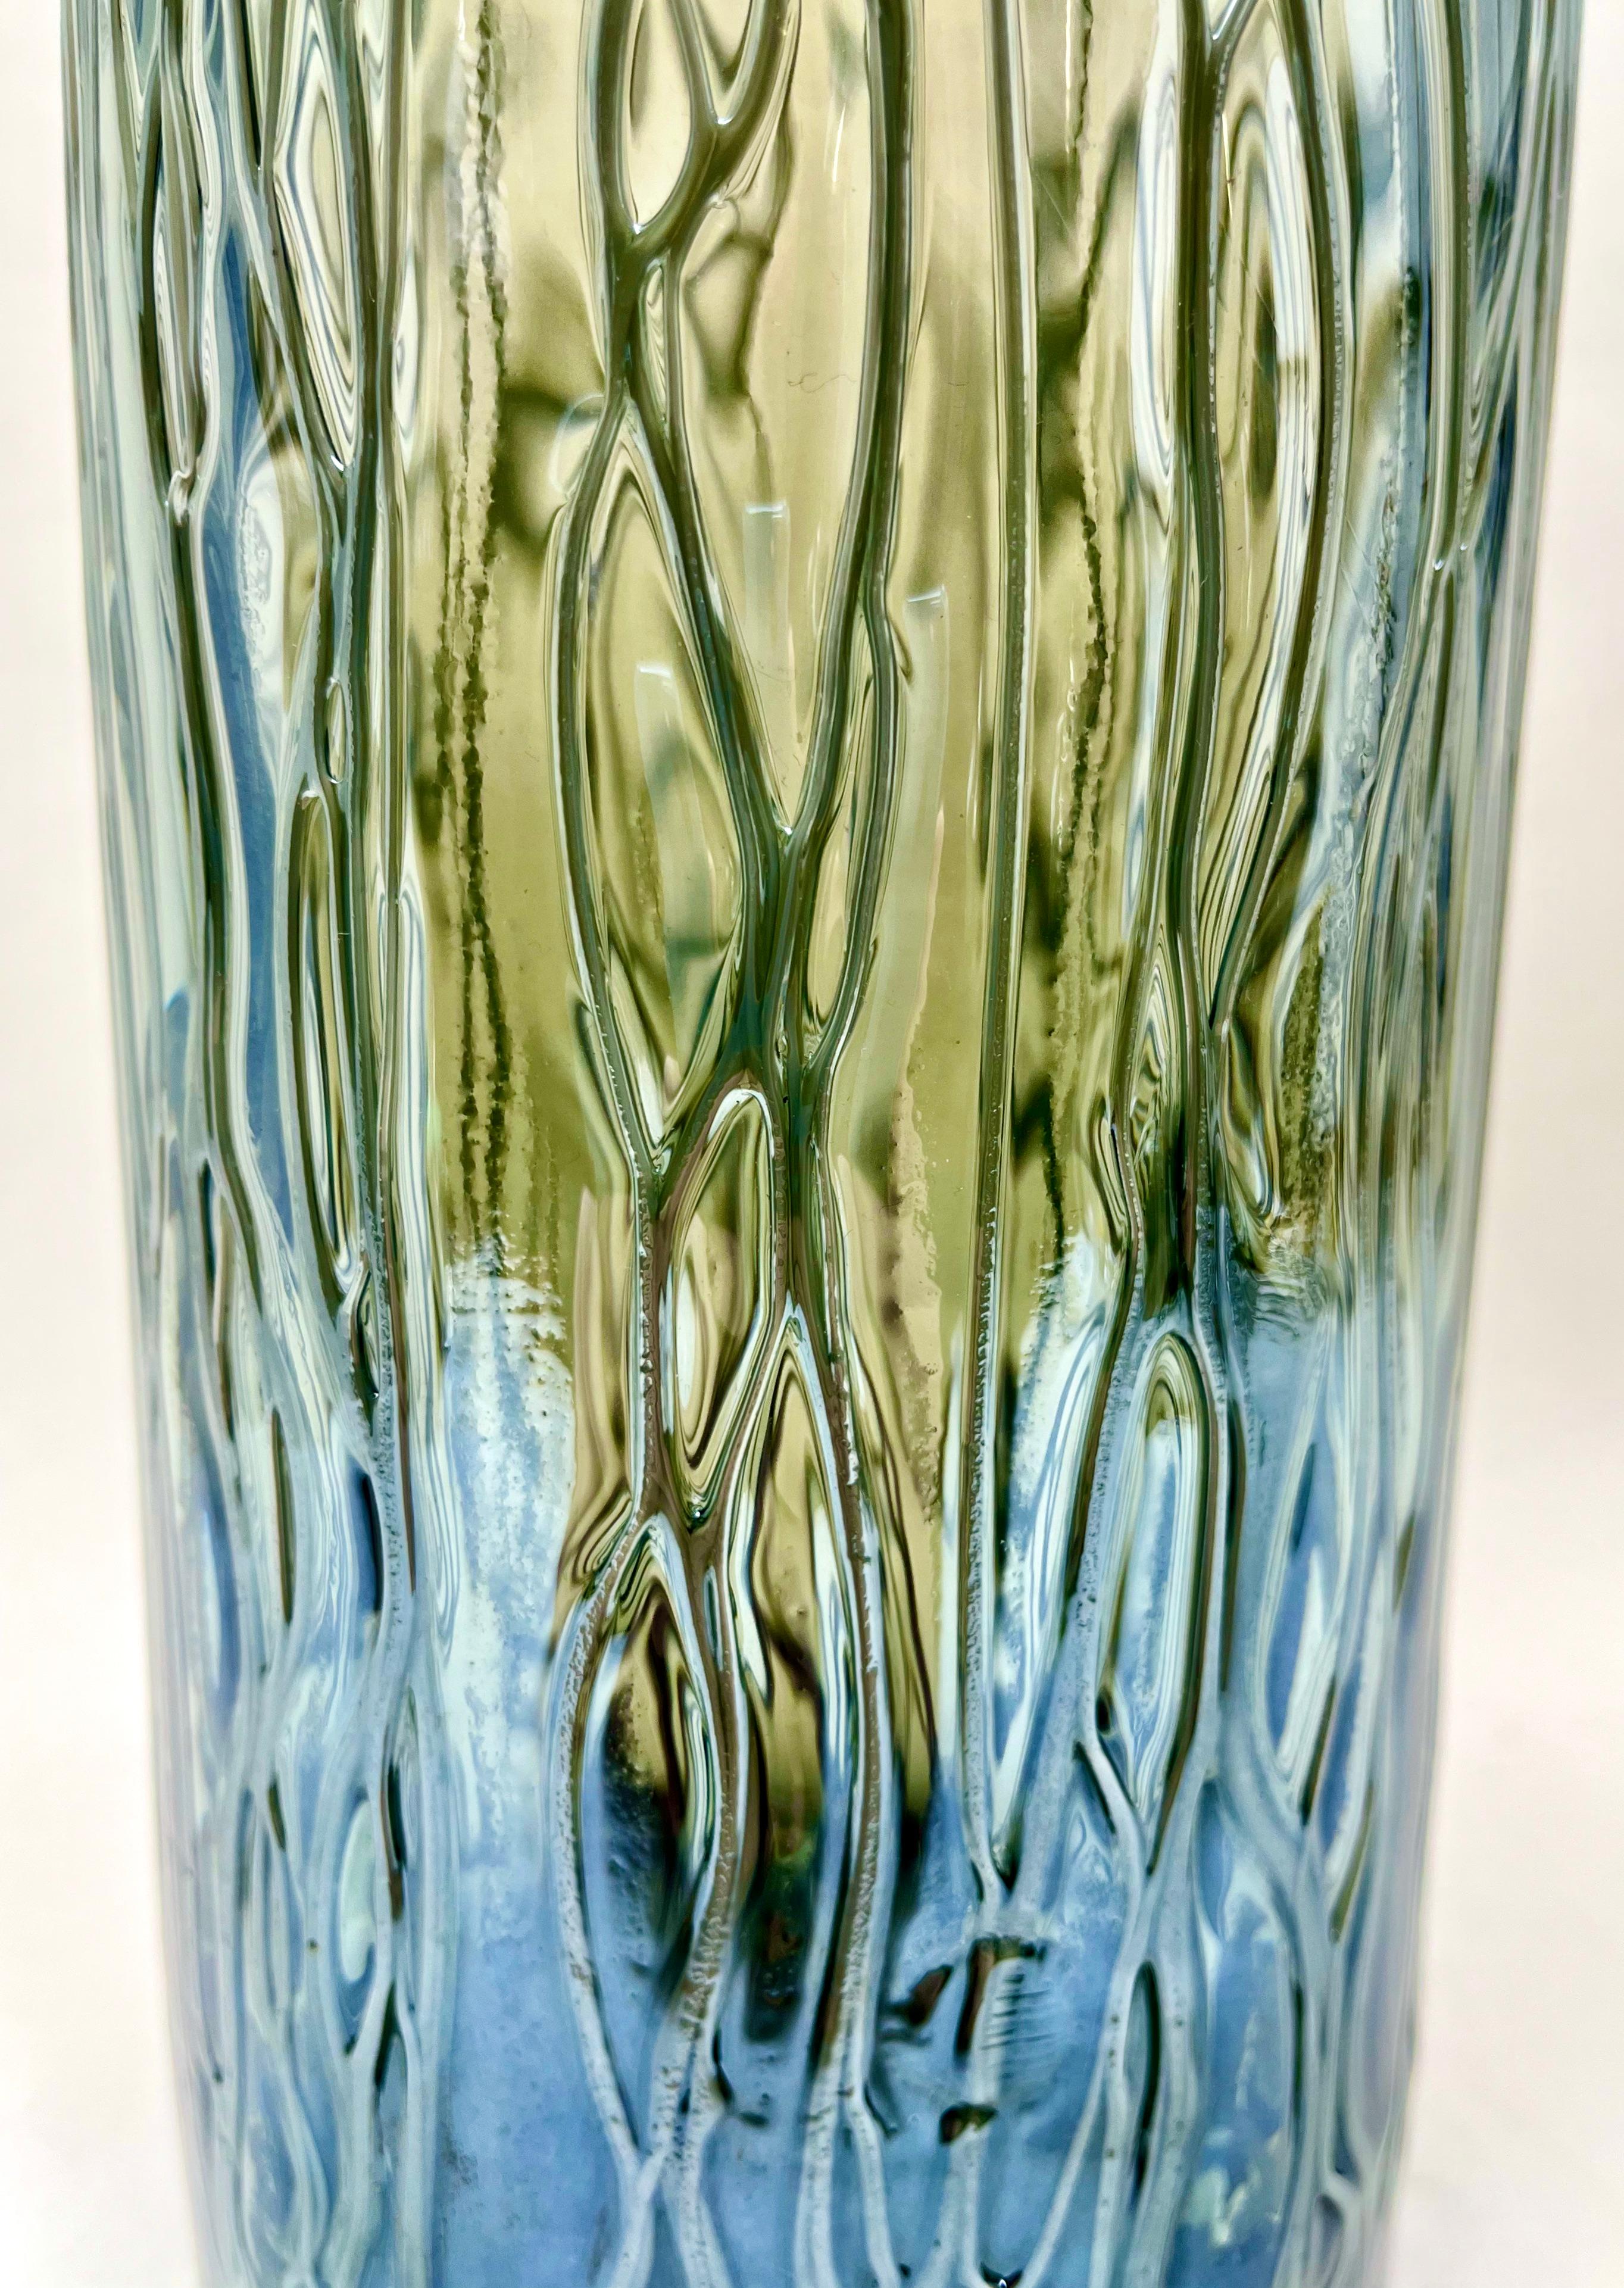 Murano Glass Murano Vasse Handcrafted with Melted Threads, 1960s For Sale